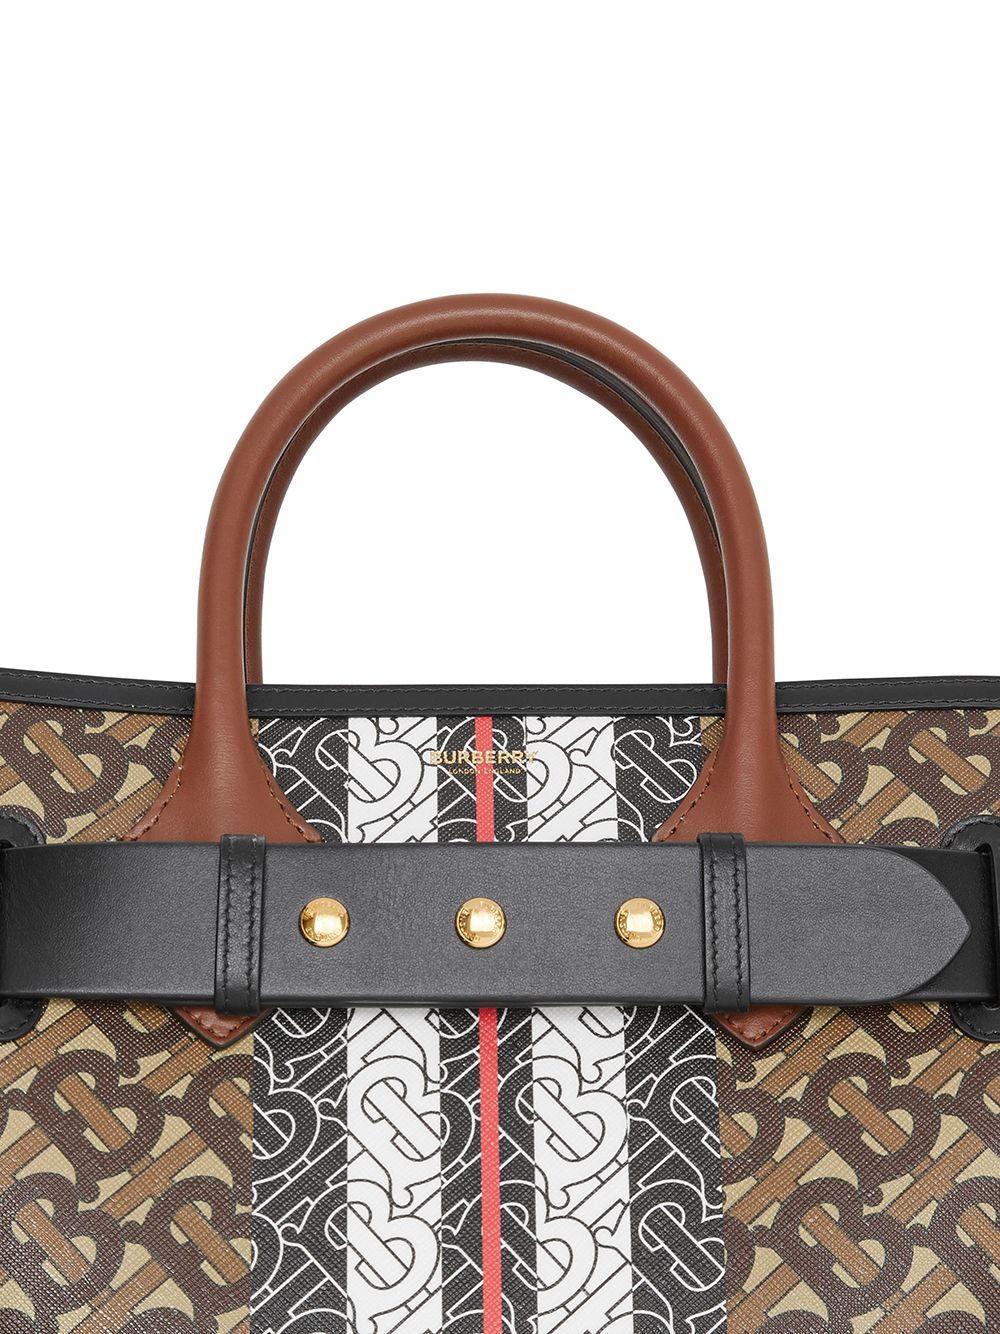 BURBERRY brown MONOGRAM STRIPE E-CANVAS SMALL BELTED TOTE Bag at